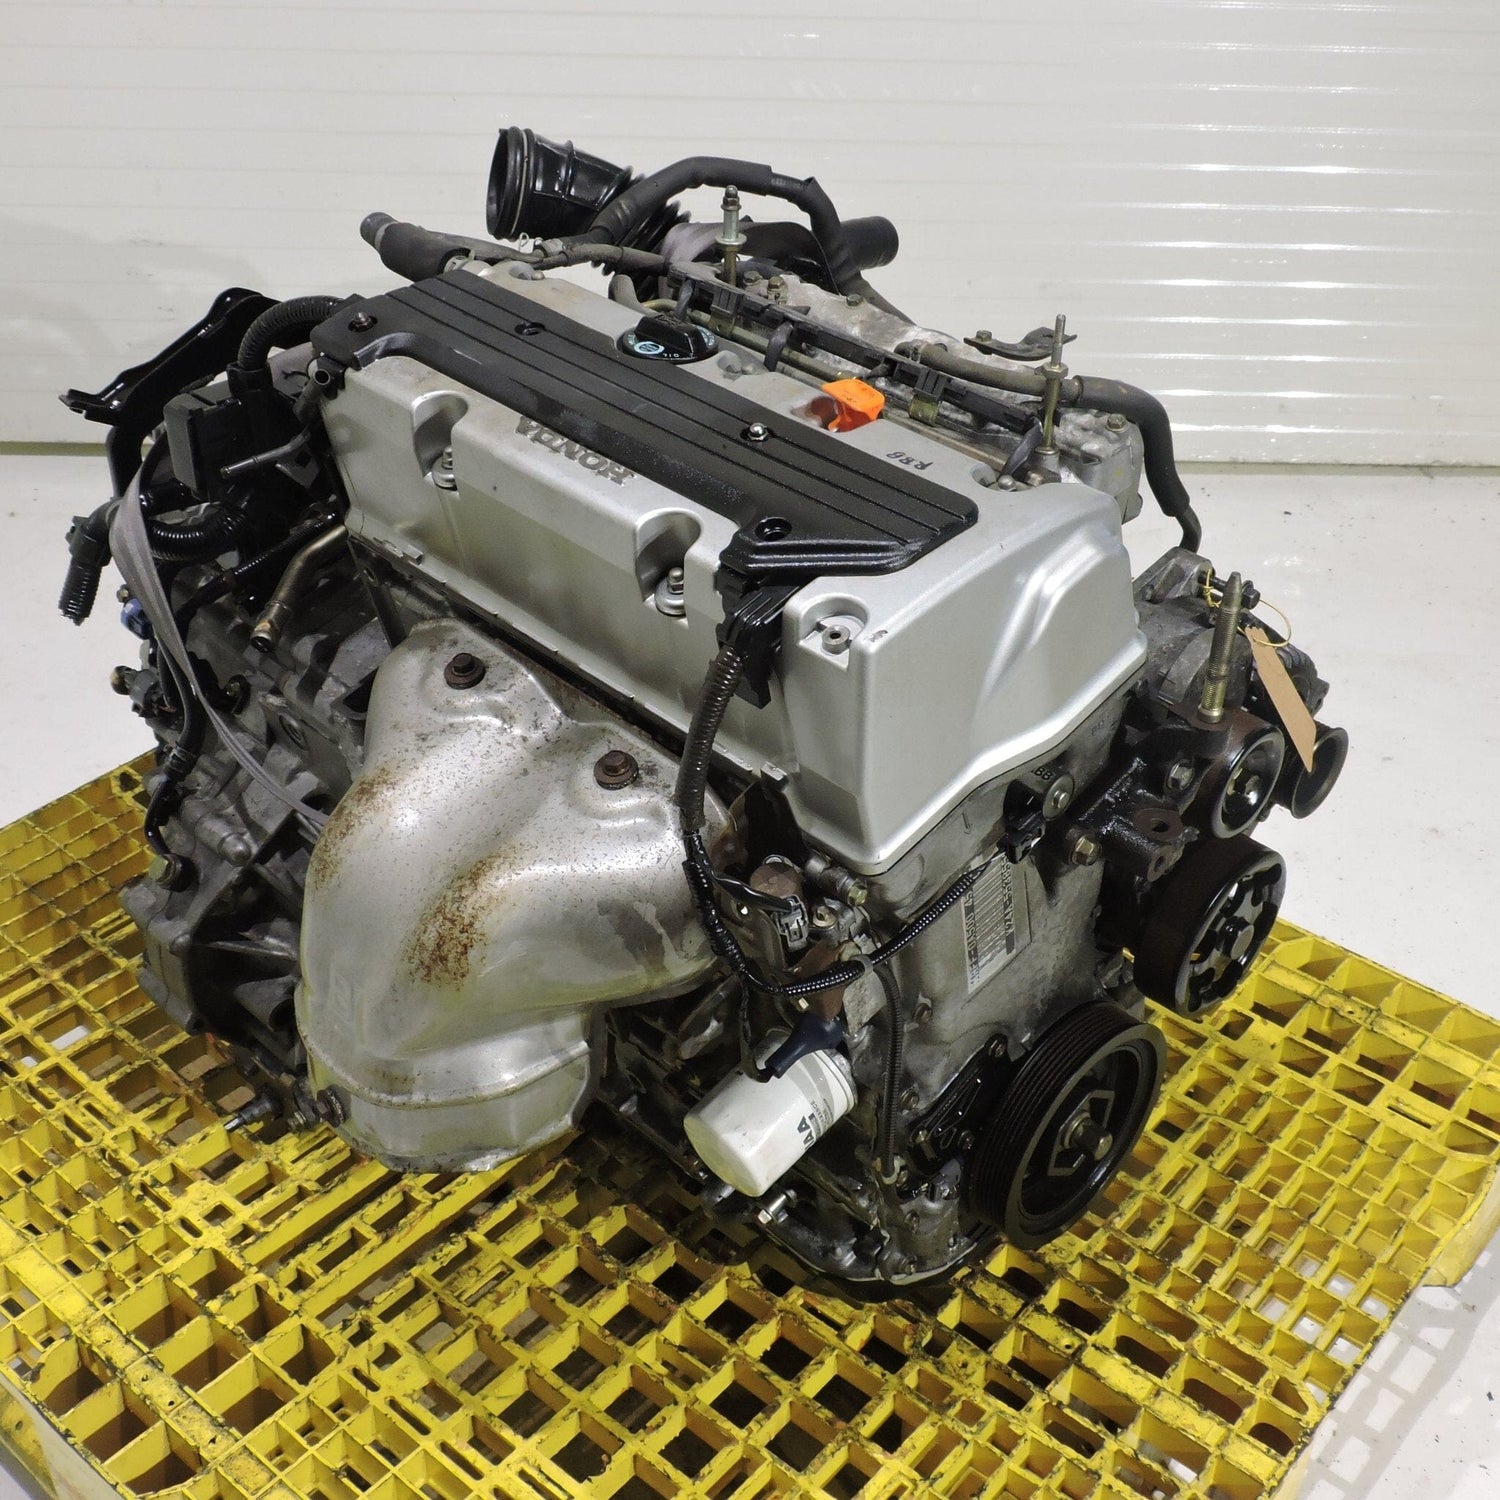 Acura TSX 2004-2008 2.4L Dohc i-Vtec JDM Engine Only - K24A - RBB Head 3 Lobe Cam - Replaces K24A2